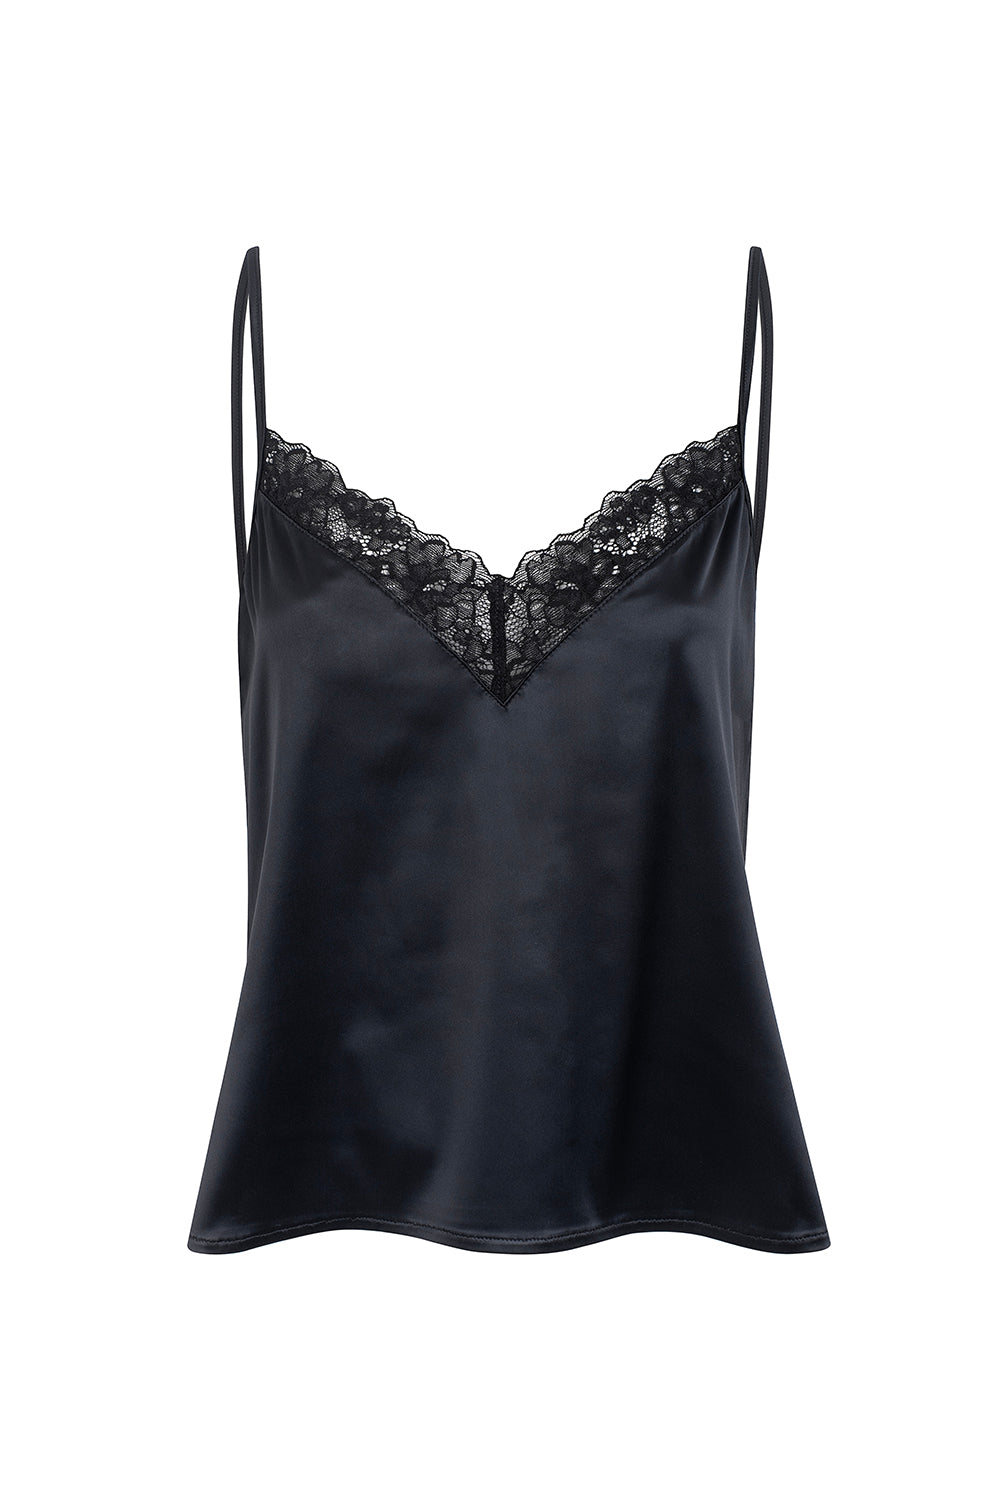 BLACK SATIN & LACE TOP (OUT OF STOCK)